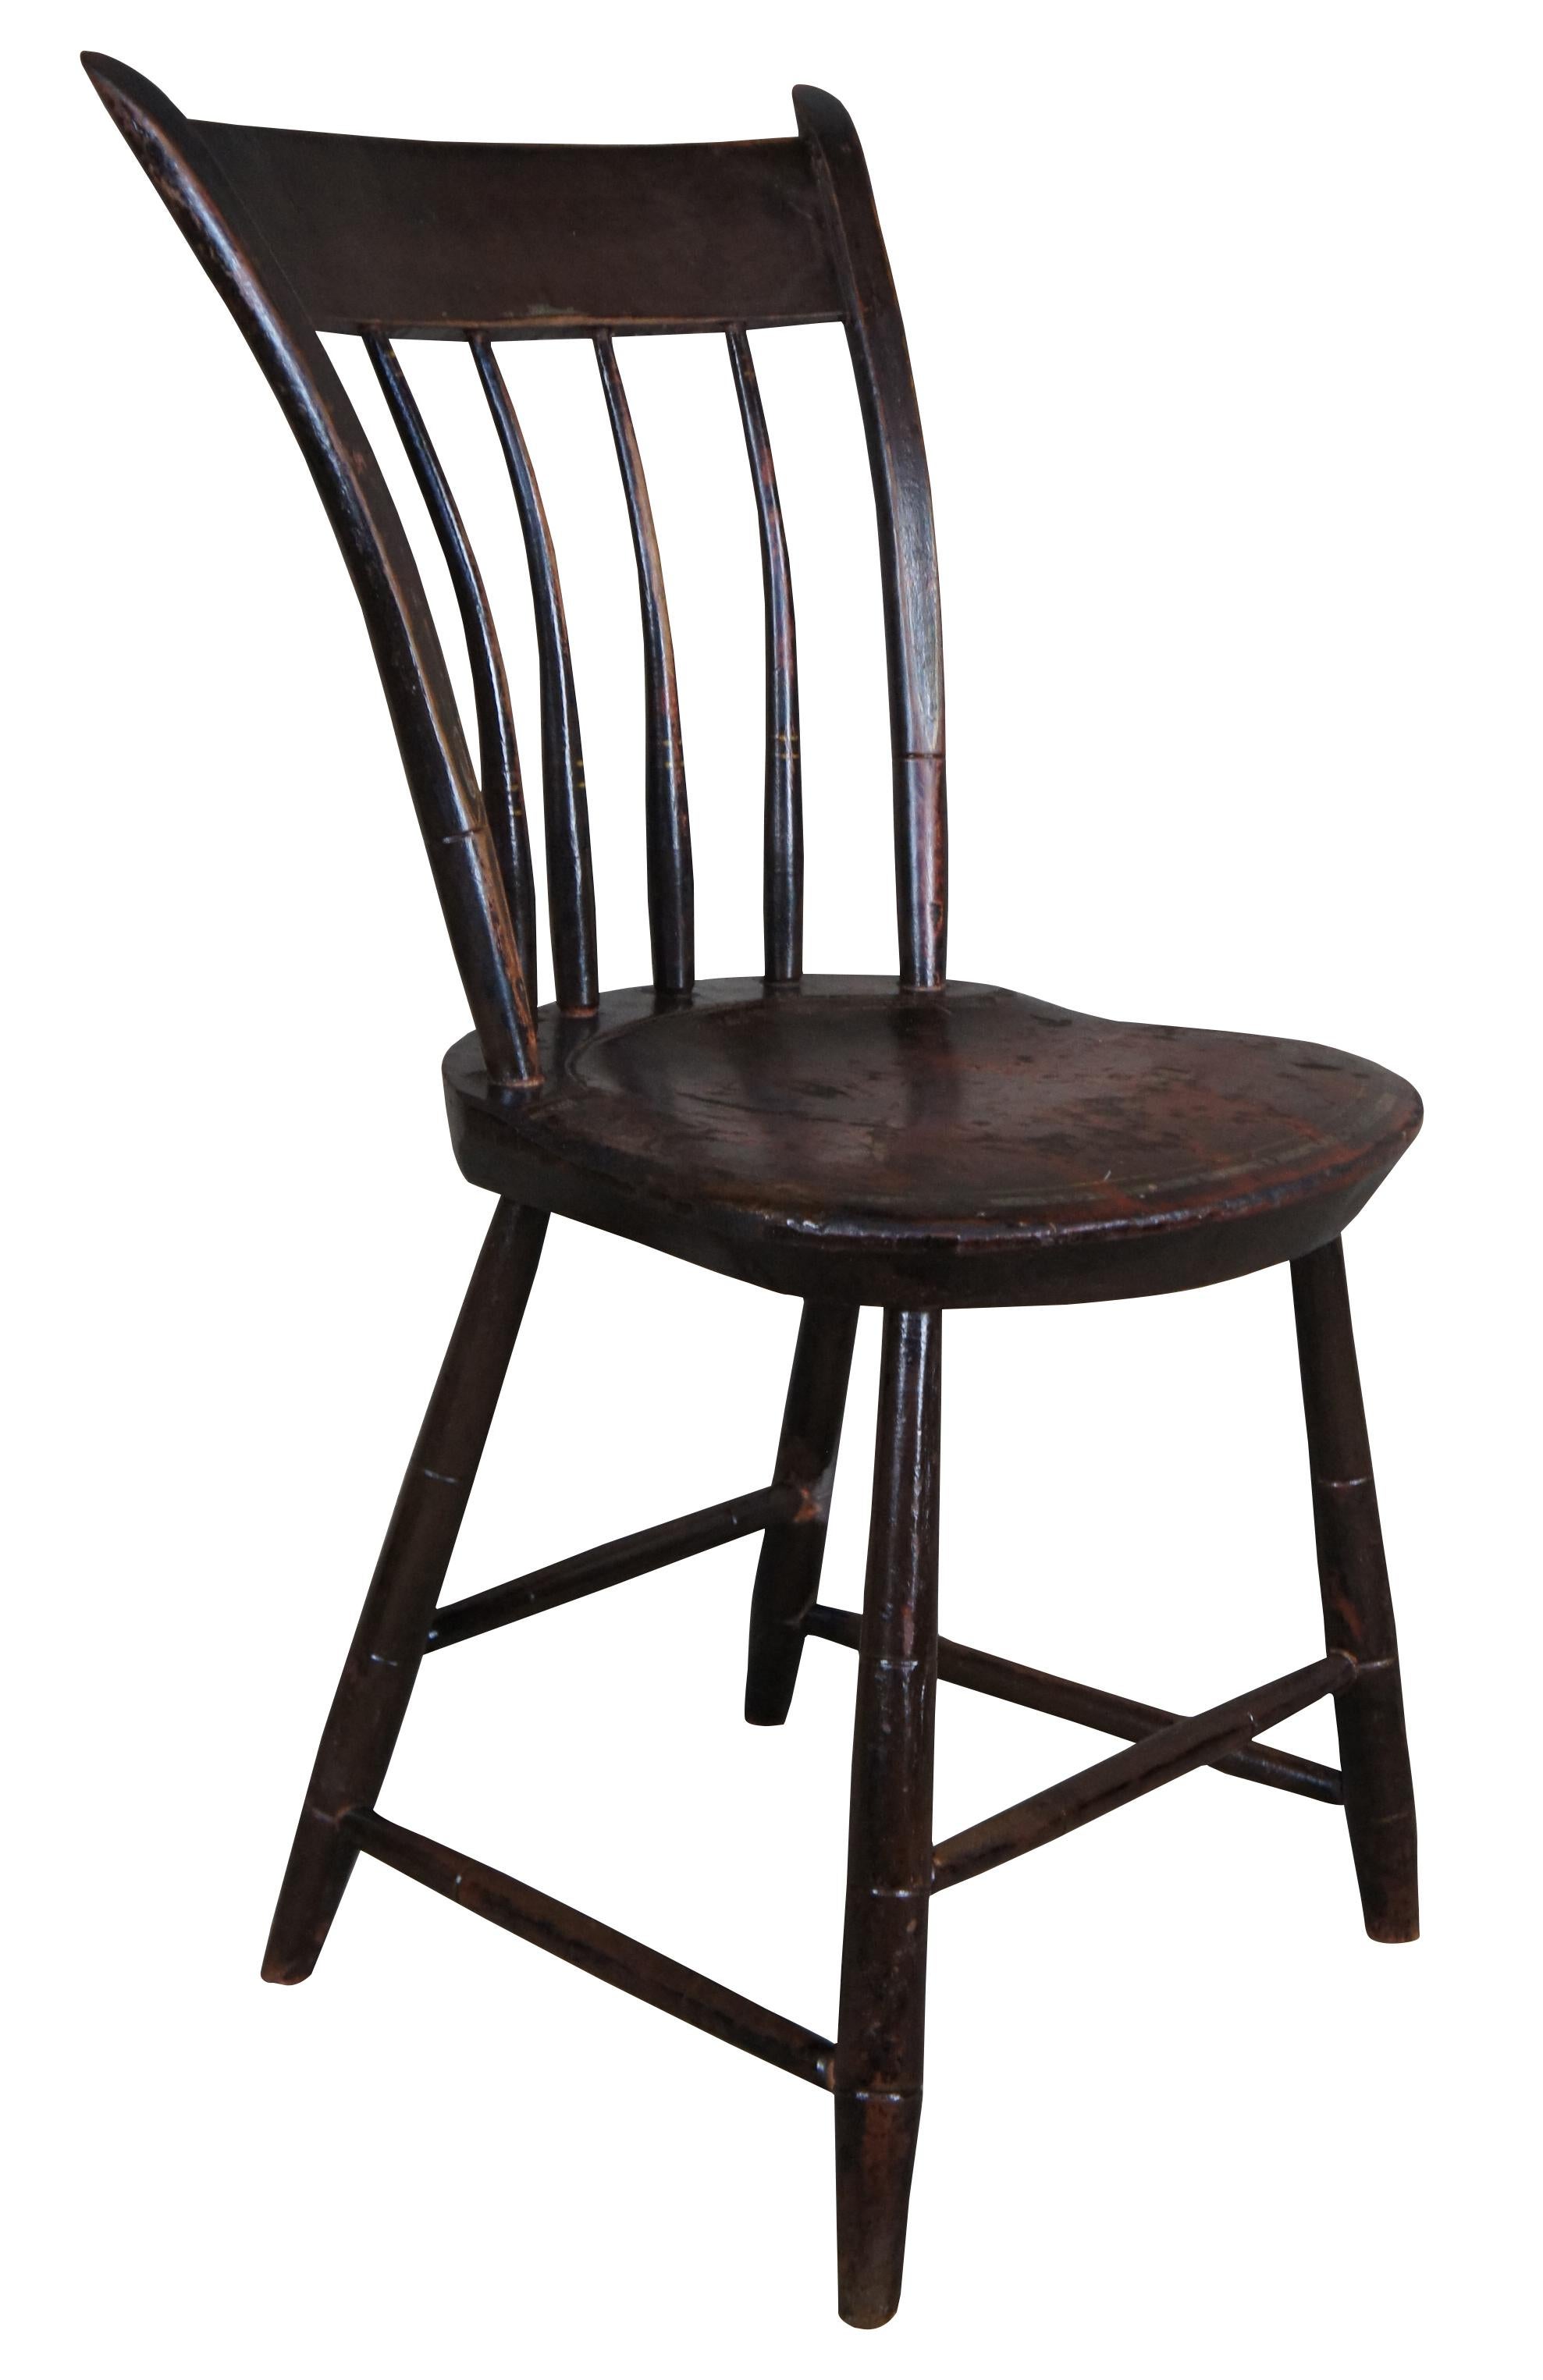 Antique primitive country or farmhouse thumb back windsor chair.
